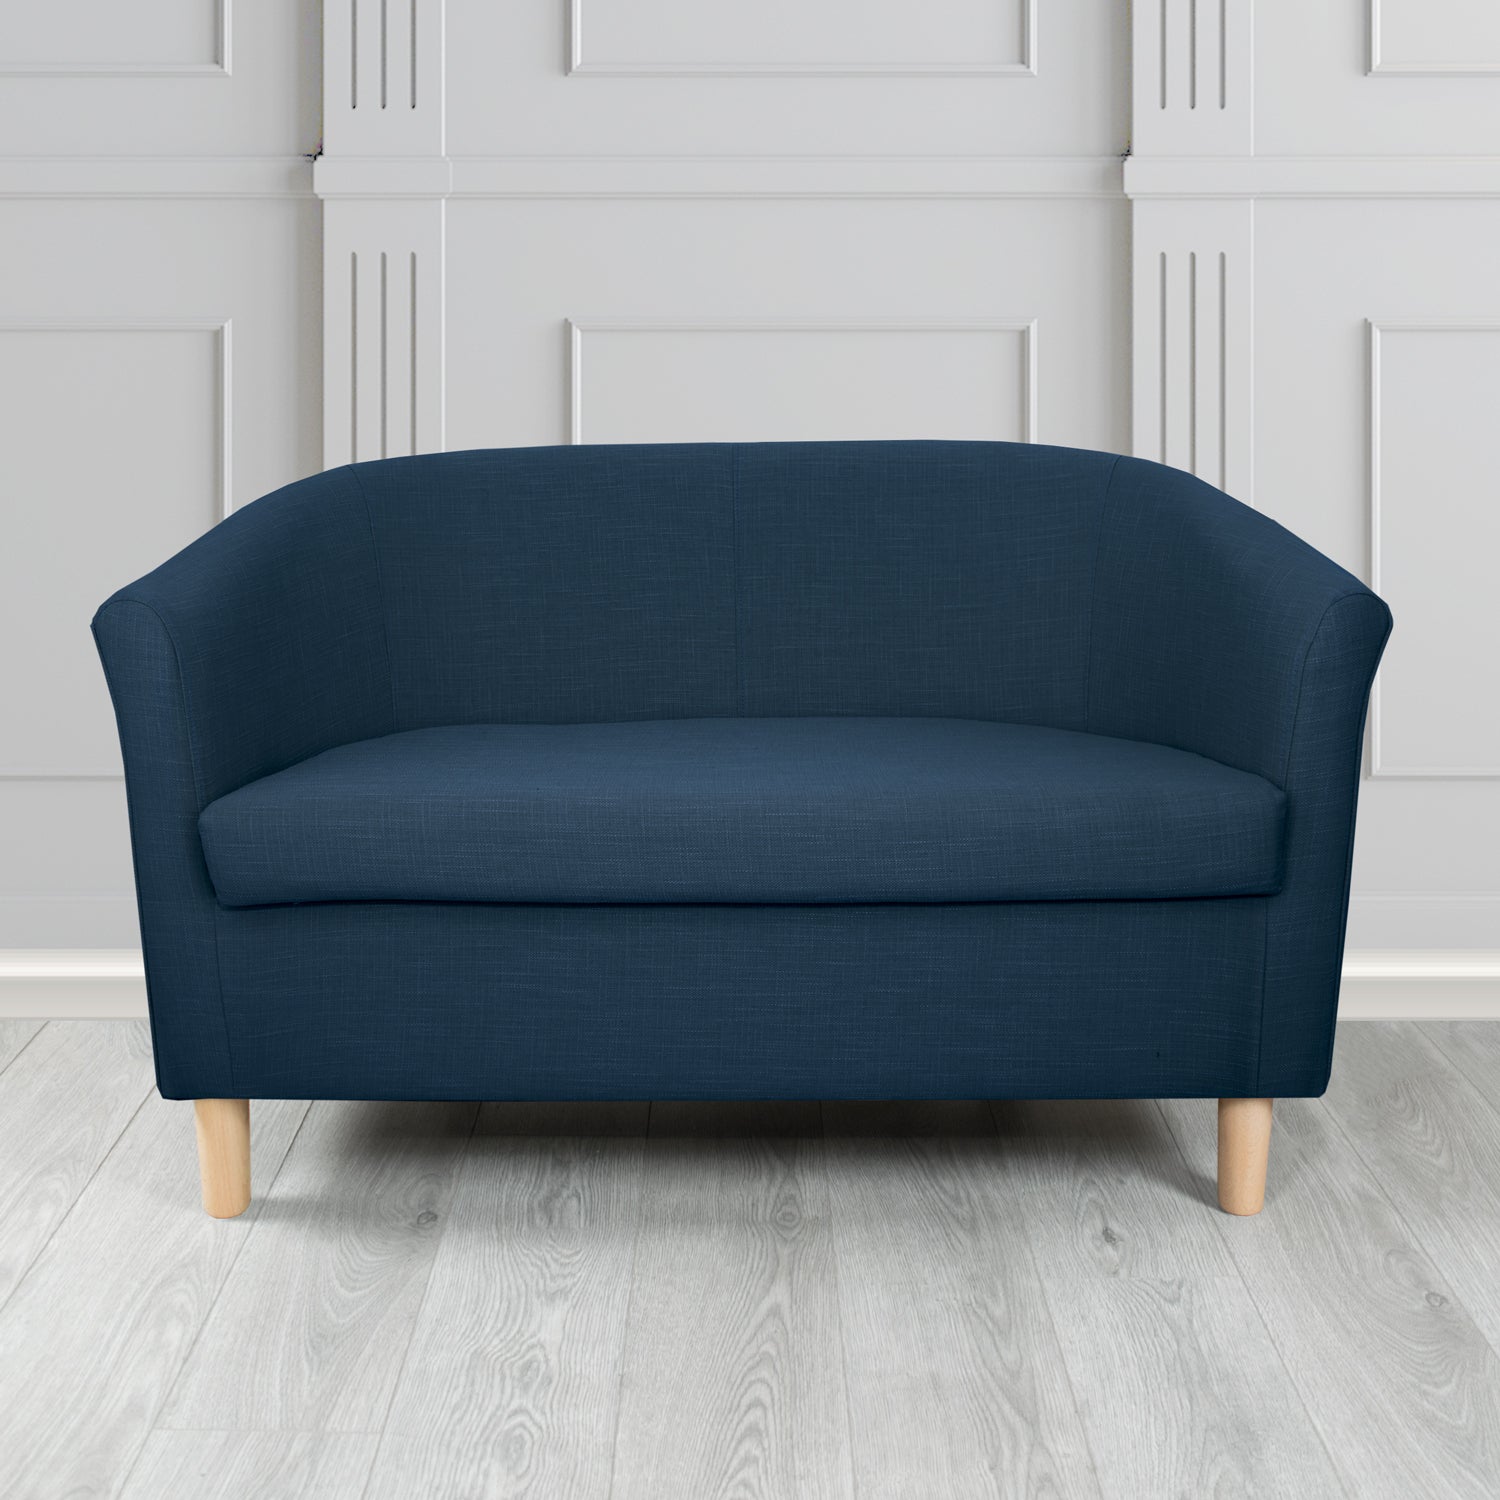 Tuscany 2 Seater Tub Sofa in Emporio Navy Linen Crib 5 Fabric - The Tub Chair Shop